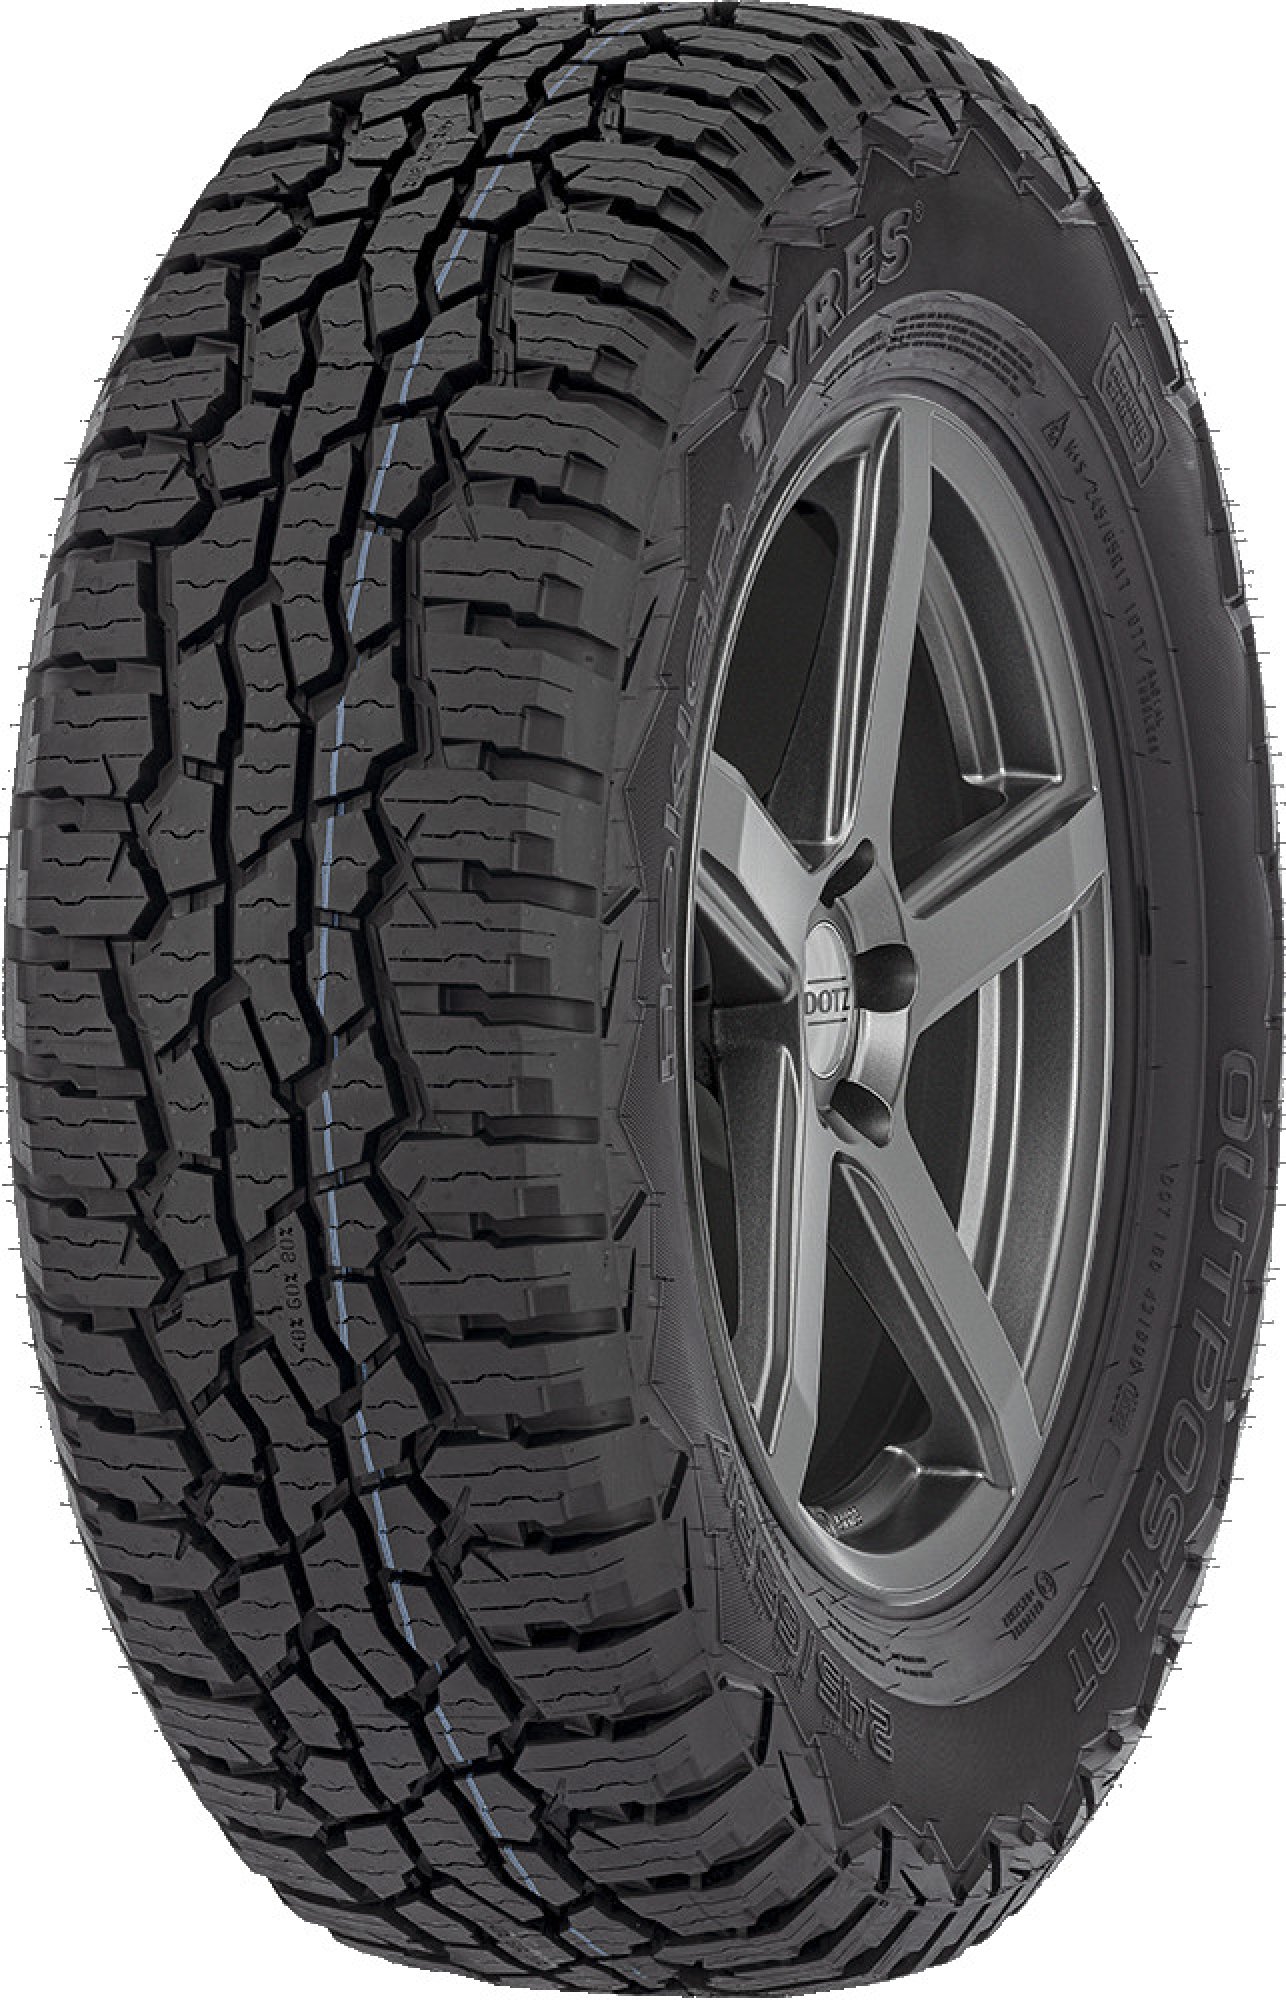 NOKIAN TYRES OUTPOST AT 235/80 R 17 120/117S